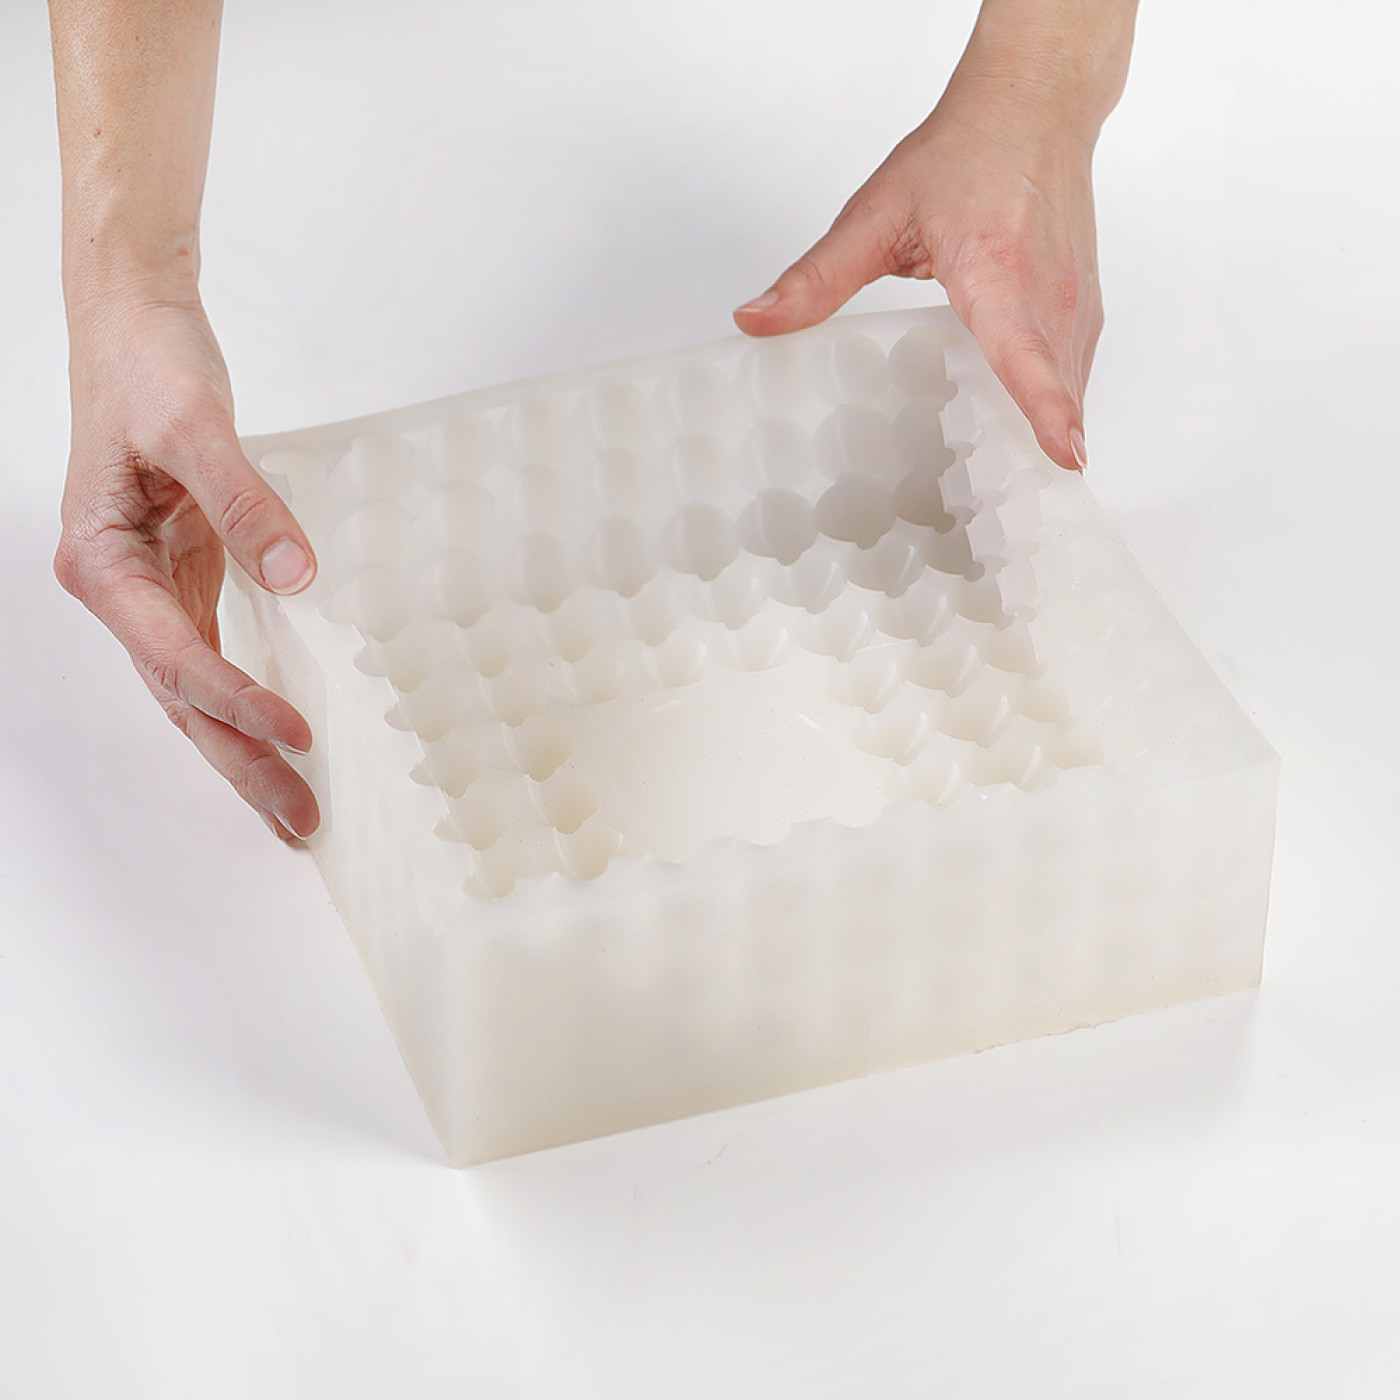 Silicone ice mold large cubes balls XXL